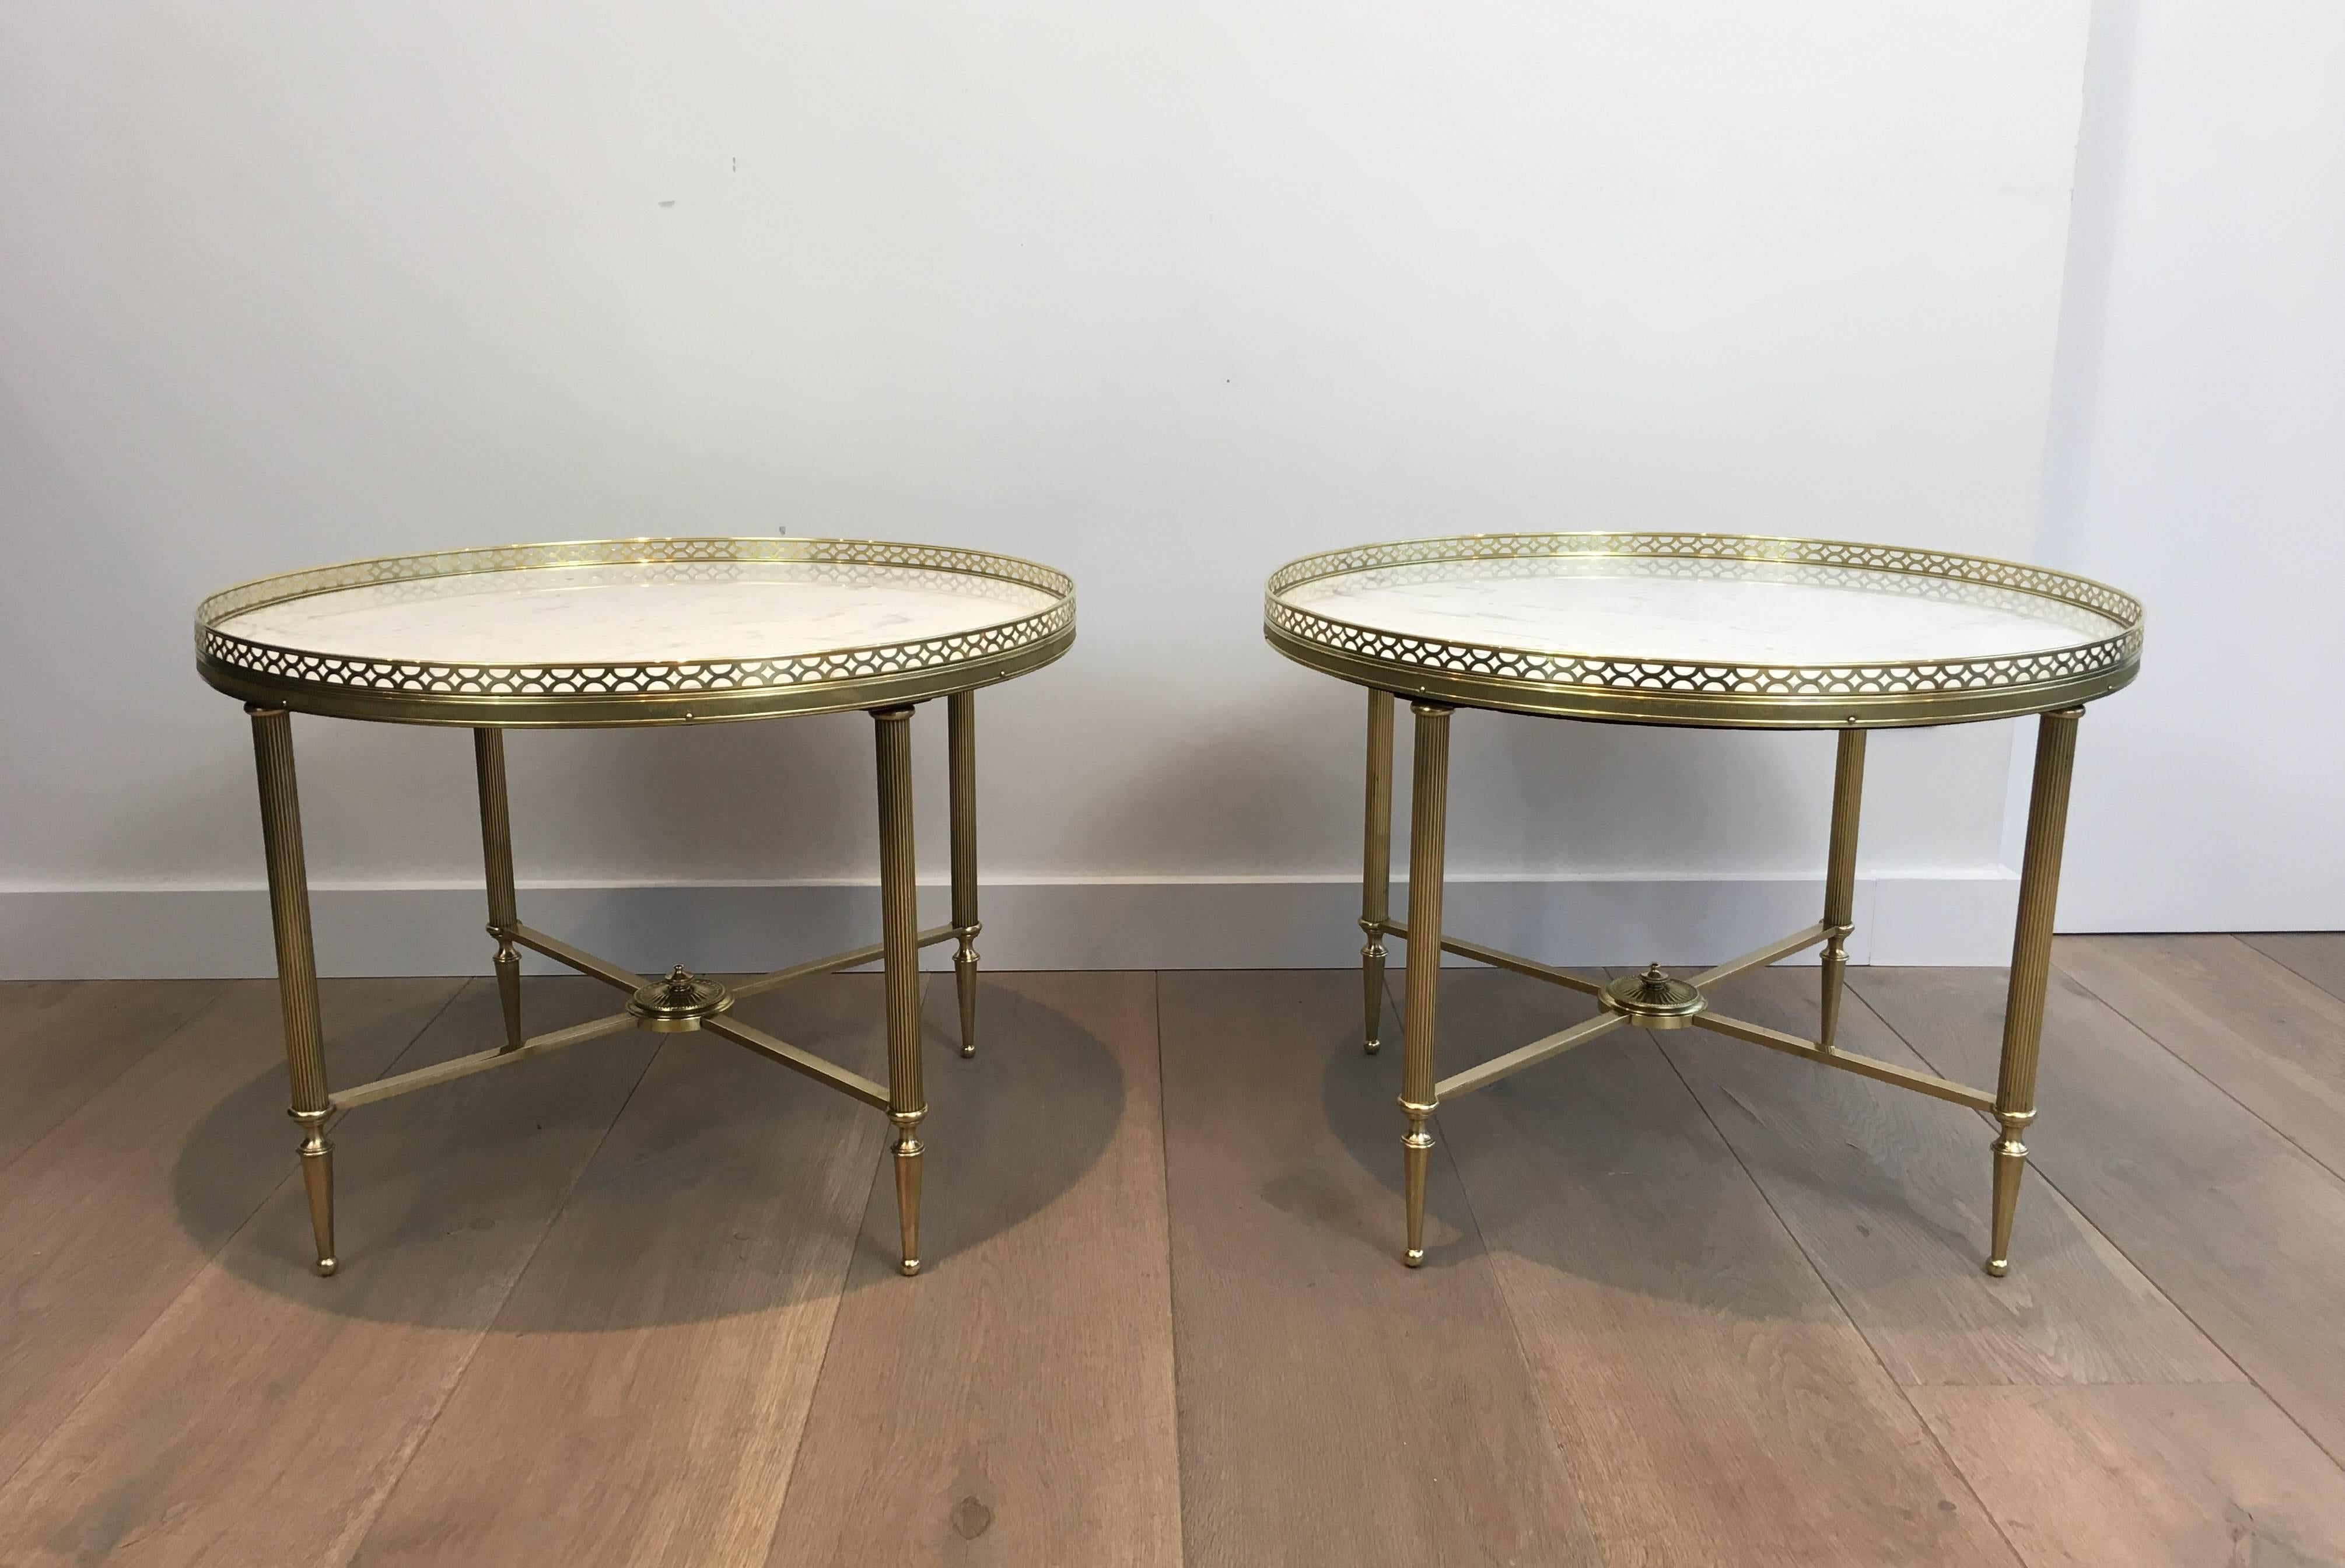 Neoclassical Pair of Brass End Tables with White Marble Tops by Maison Jansen